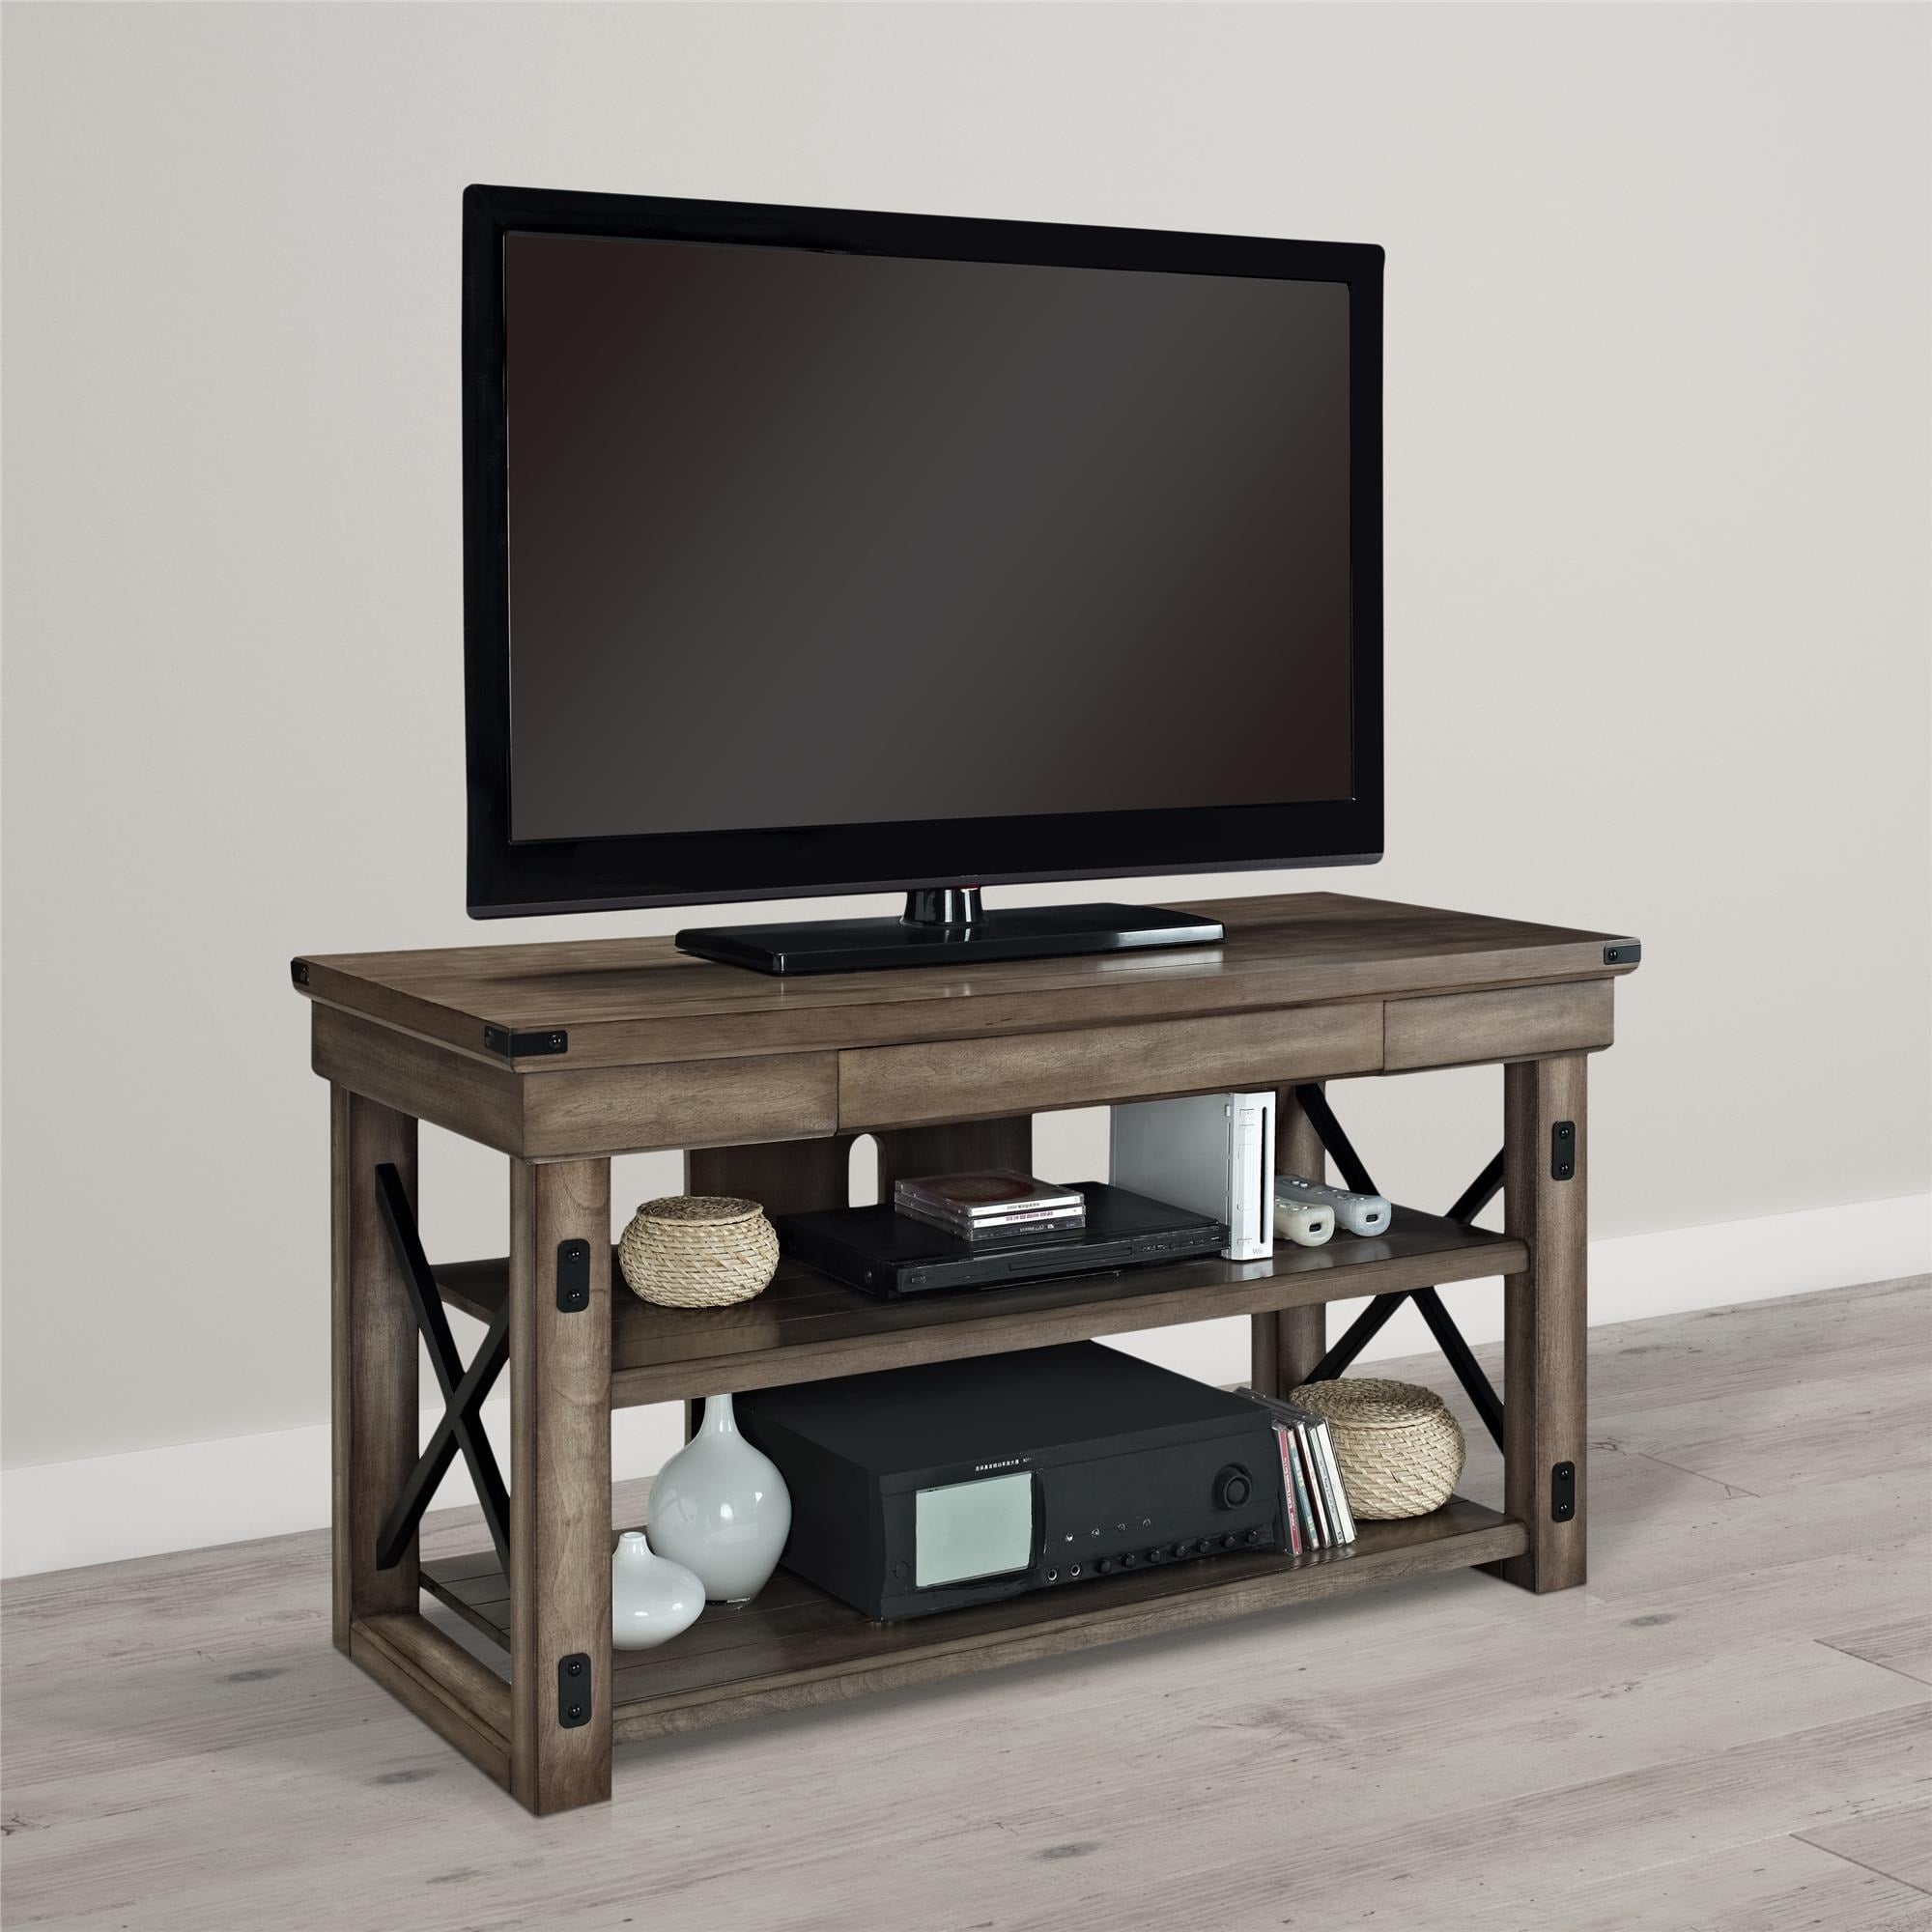 Shop Avenue Greene Woodgate Wood Veneer TV Stand for up to ...